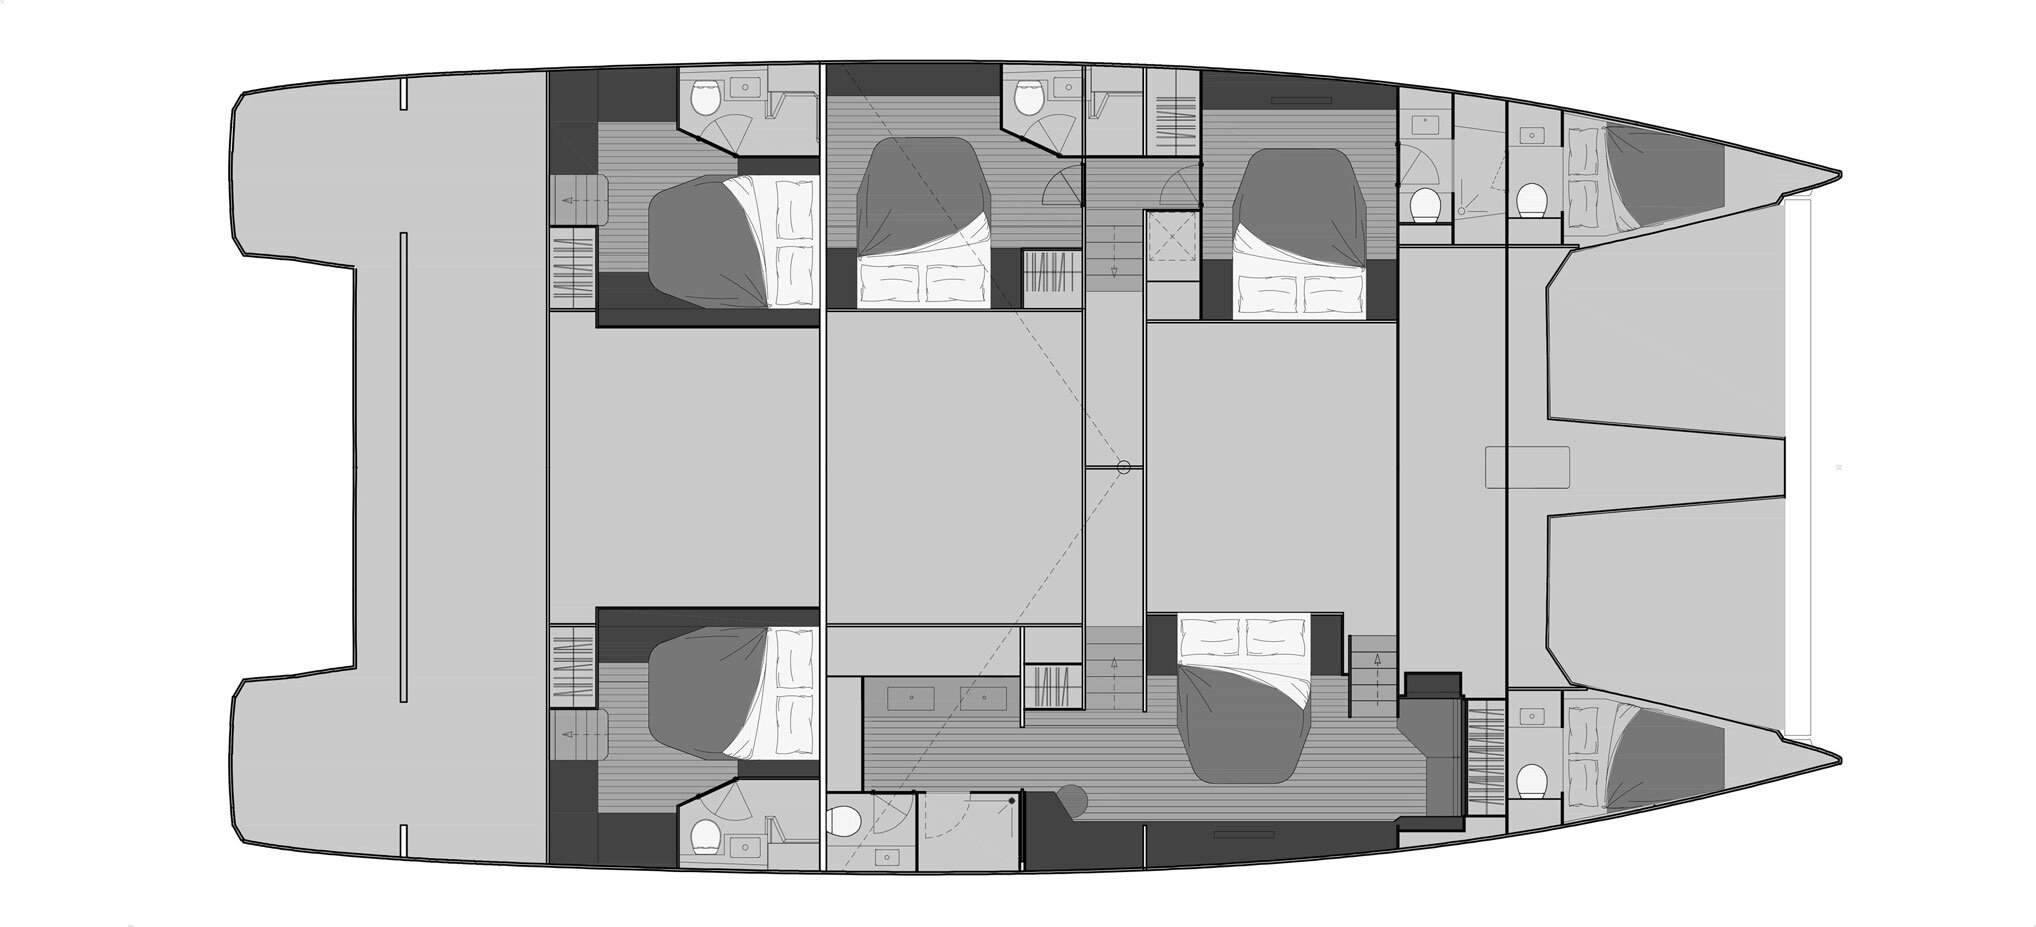 Power67_Layout_Maestro-version---Double-bed-portside-aft-cabin.jpg